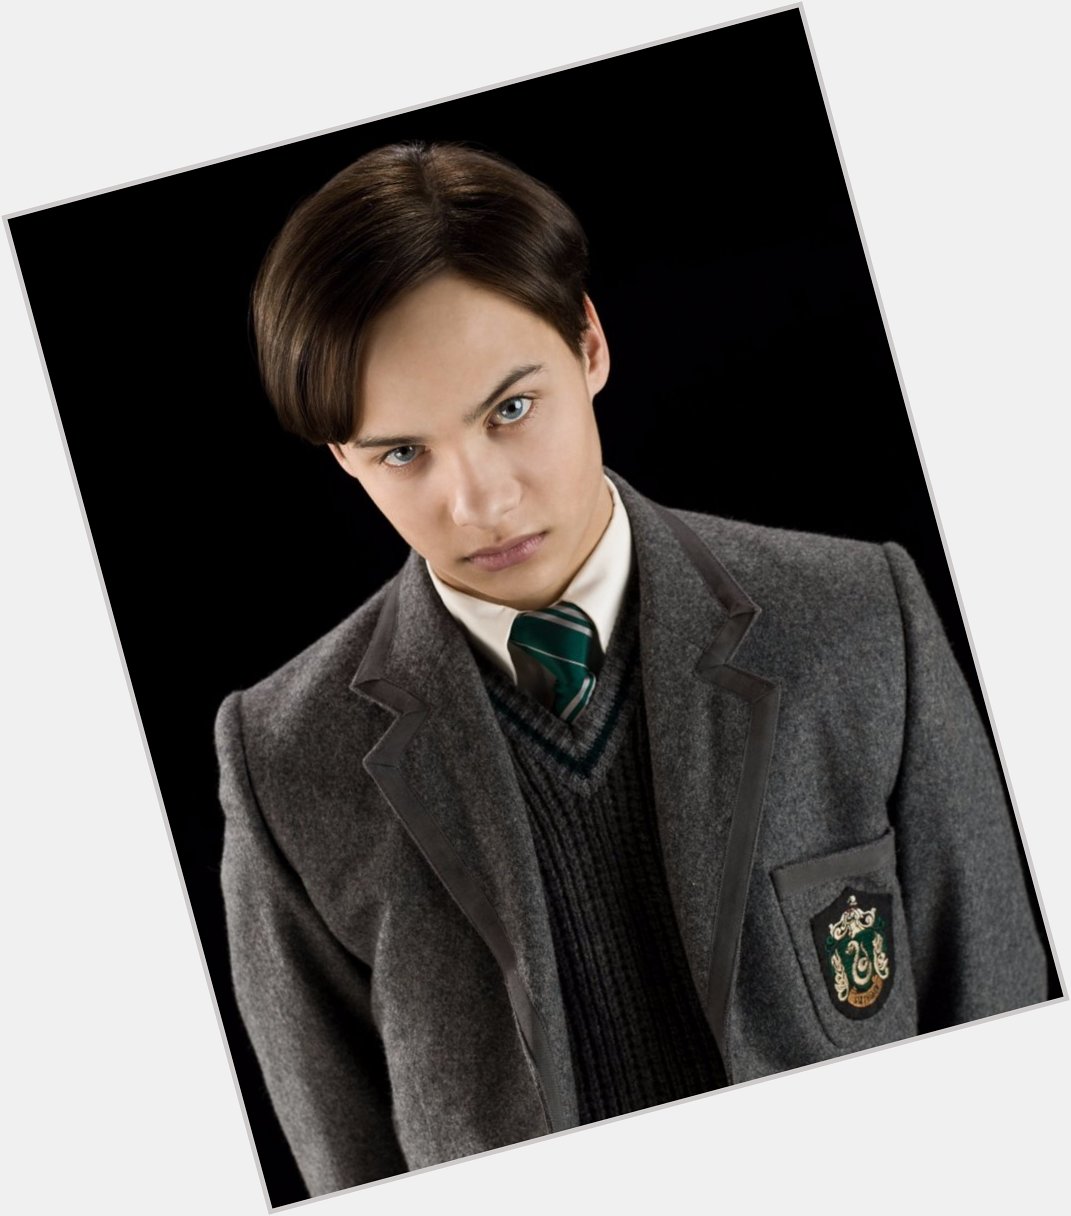 Happy Birthday to Frank Dillane, who portrayed teen Tom Riddle in and the Half Blood Prince! 